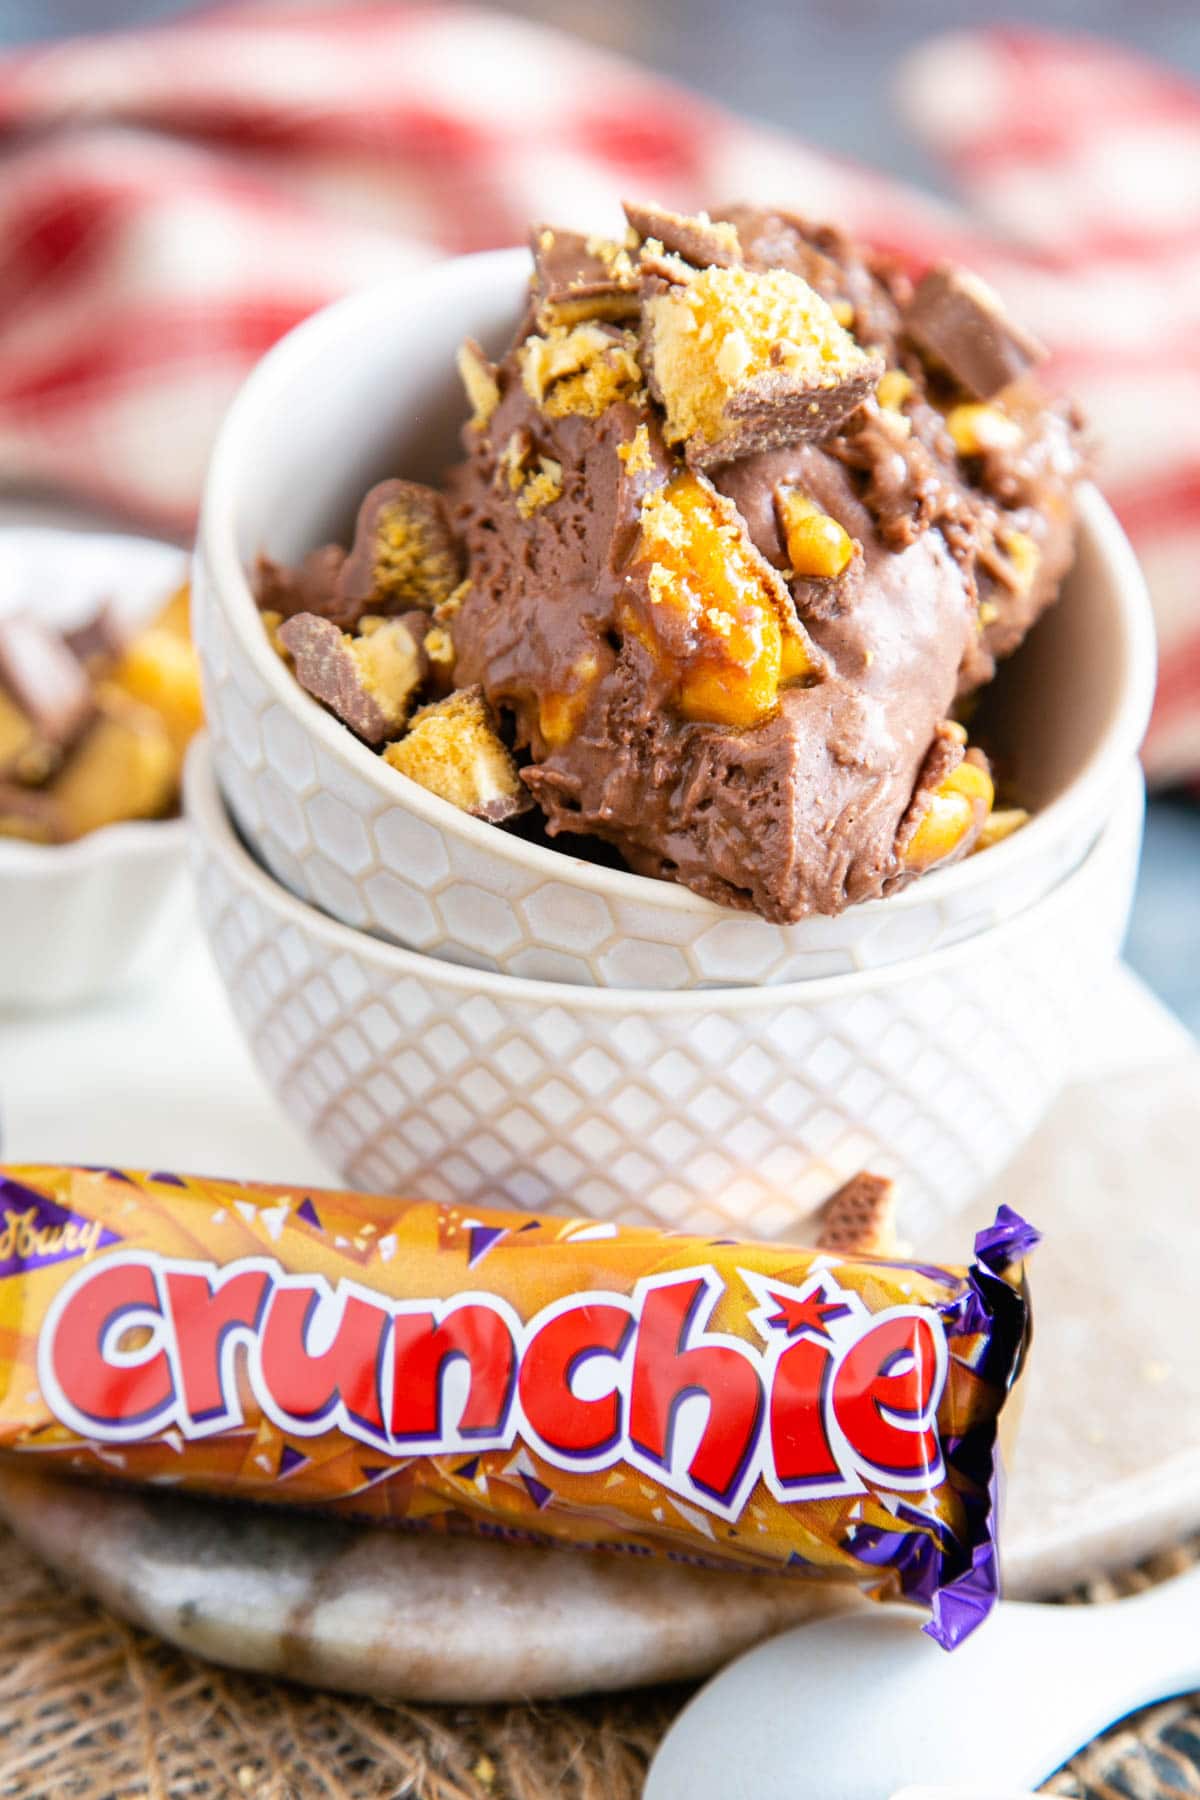 Two stacked bowls, the top containing delicious Crunchie ice cream. In front of the bowls is an unopened Crunchie bar.